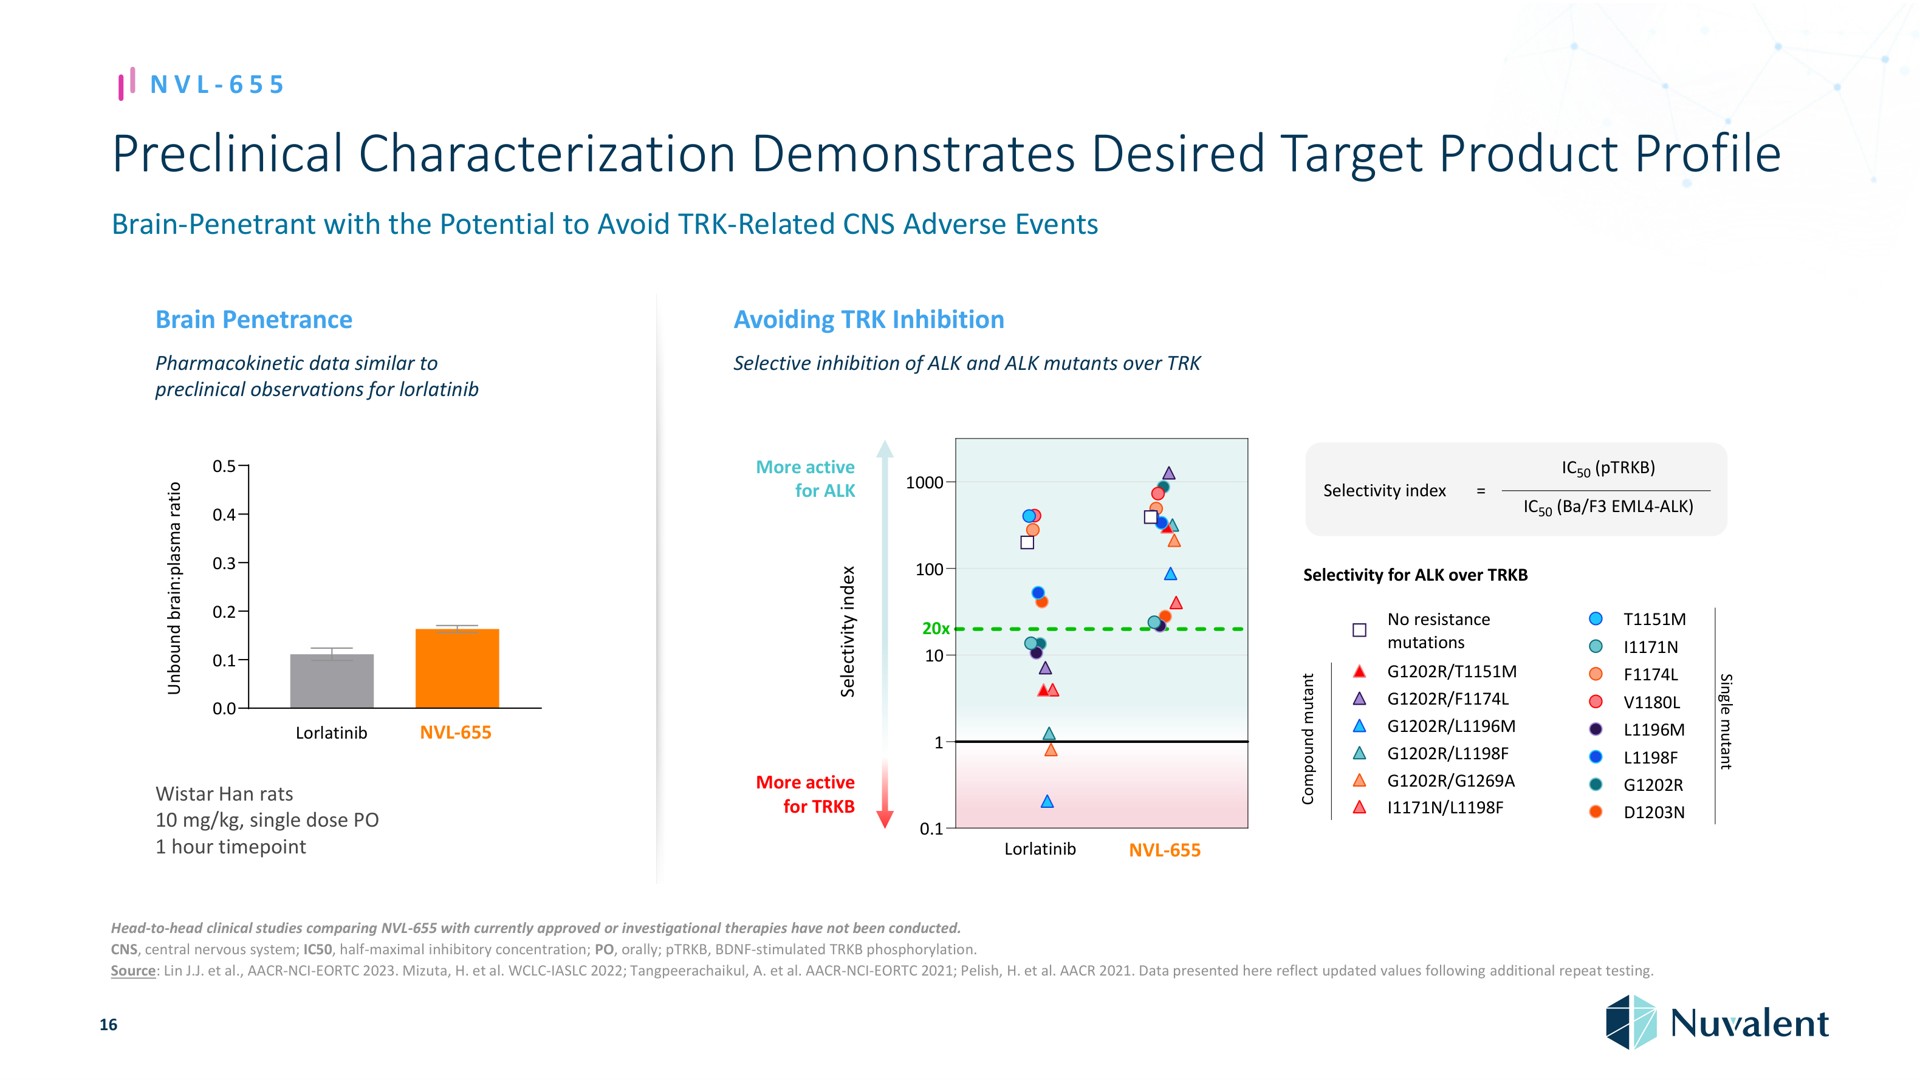 preclinical characterization demonstrates desired target product profile brain penetrant with the potential to avoid related adverse events brain penetrance avoiding inhibition data similar to observations for selective inhibition of alk and alk mutants over i a a a i a han rats single dose hour more active for alk a a a a a more active for a selectivity index alk selectivity for alk over no resistance mutations a a a head to head clinical studies comparing with currently approved or investigational therapies have not been conducted central nervous system half maximal inhibitory concentration orally stimulated phosphorylation source lin a data presented here reflect updated values following additional repeat testing | Nuvalent